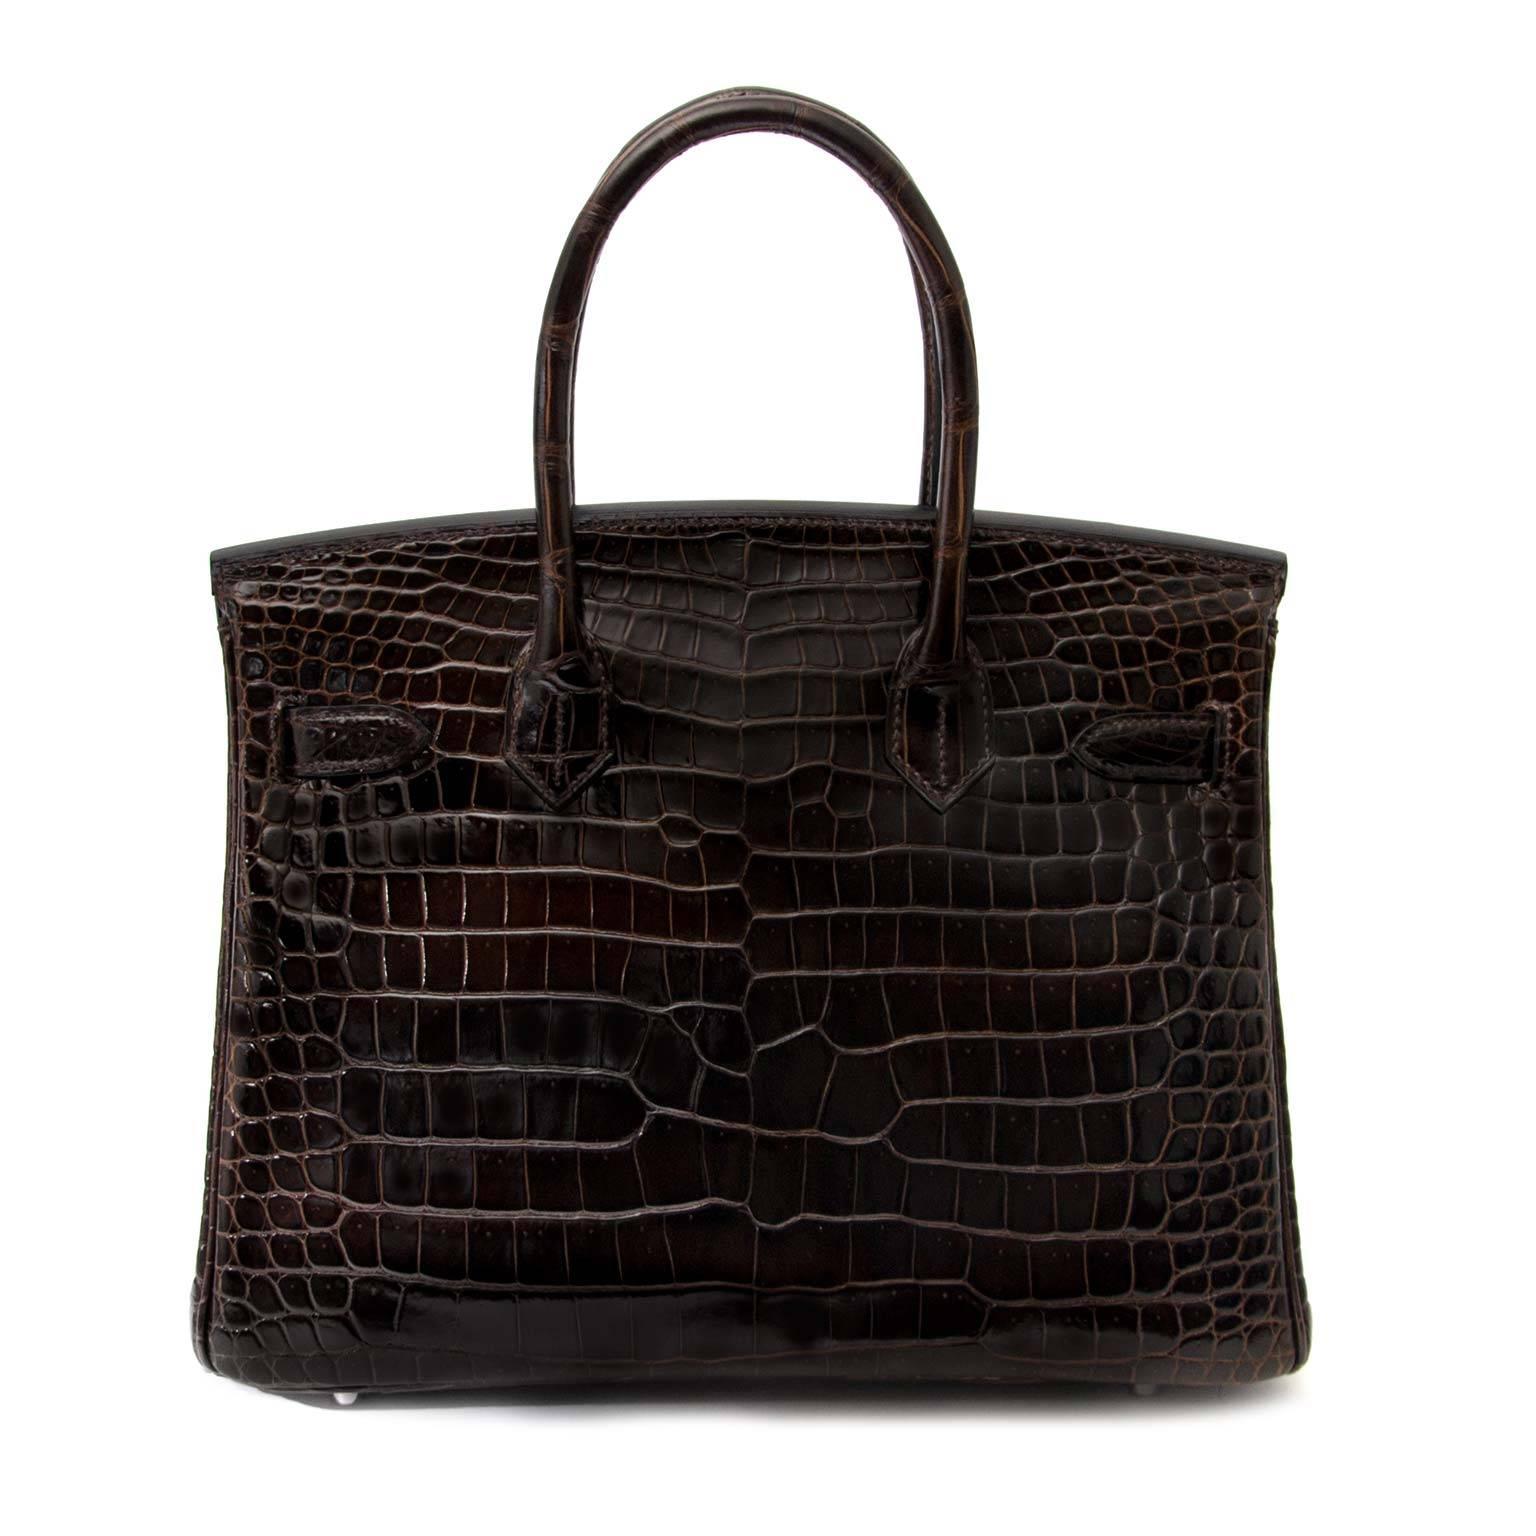 Never used , full set 

Hermès Birkin 30 Croco Porosus Lisse Havane PHW

This extremely rare and precious Hermès Birkin 30 Croco Porosus Lisse in timeless Havane color truly is the height of luxury. Its super chique hue is the perfect shade of brown